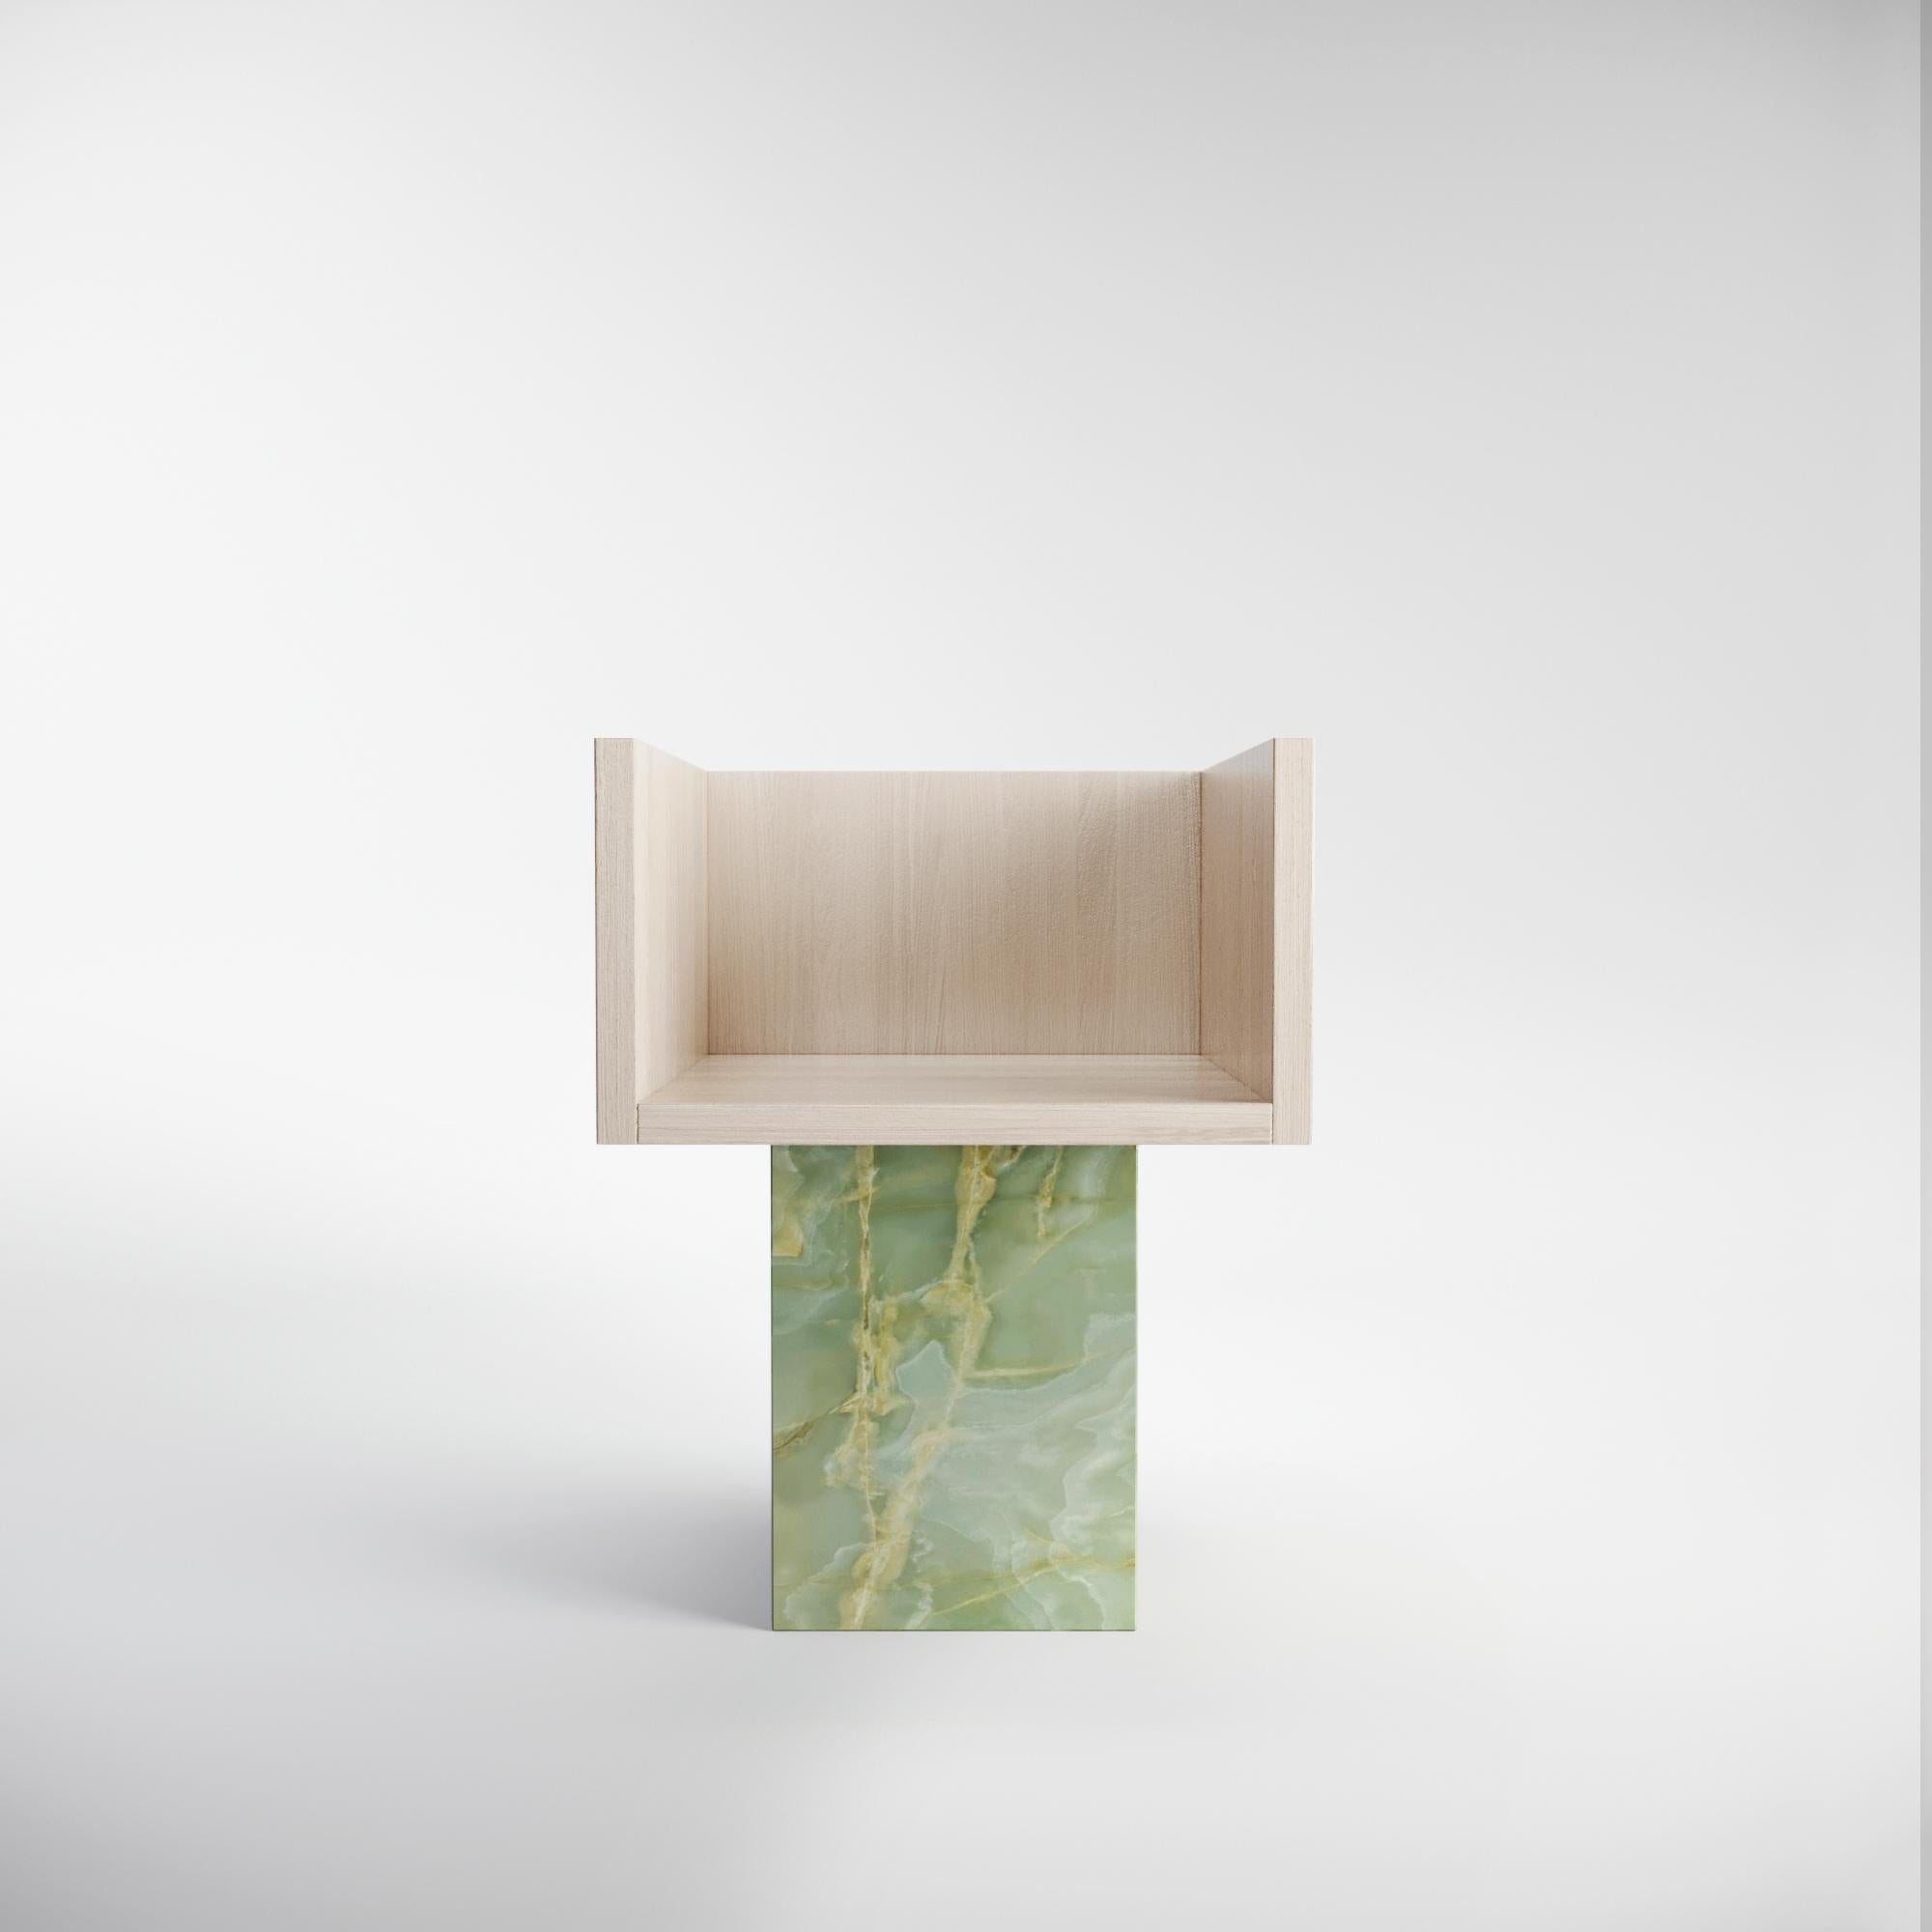 Trono Onyx Green Persian Chair by Lisa Franzen
Dimensions: D 53 x W 53 x H 72 cm.
Materials: Onyx Green Persian and natural Oak.

Exclusively handmade in Switzerland. Please contact us.

Lisa Franzen (1989) is an Italian – Russian interior